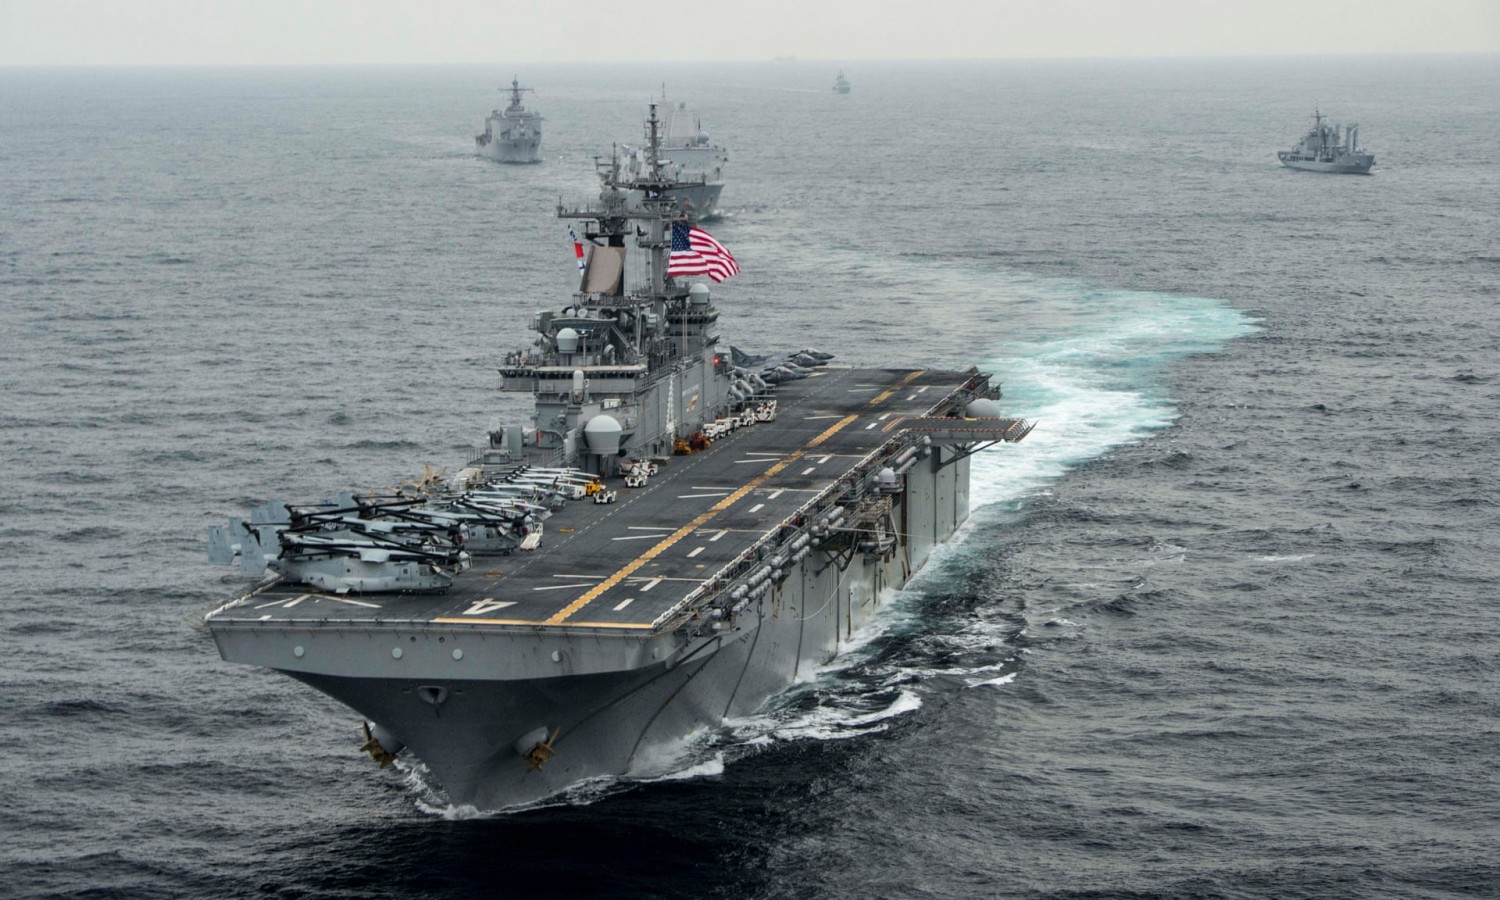 Trump said the USS Boxer took action after the drone came within 1,000 yards. Photograph: Craig Z Rodarte/AFP/Getty Images